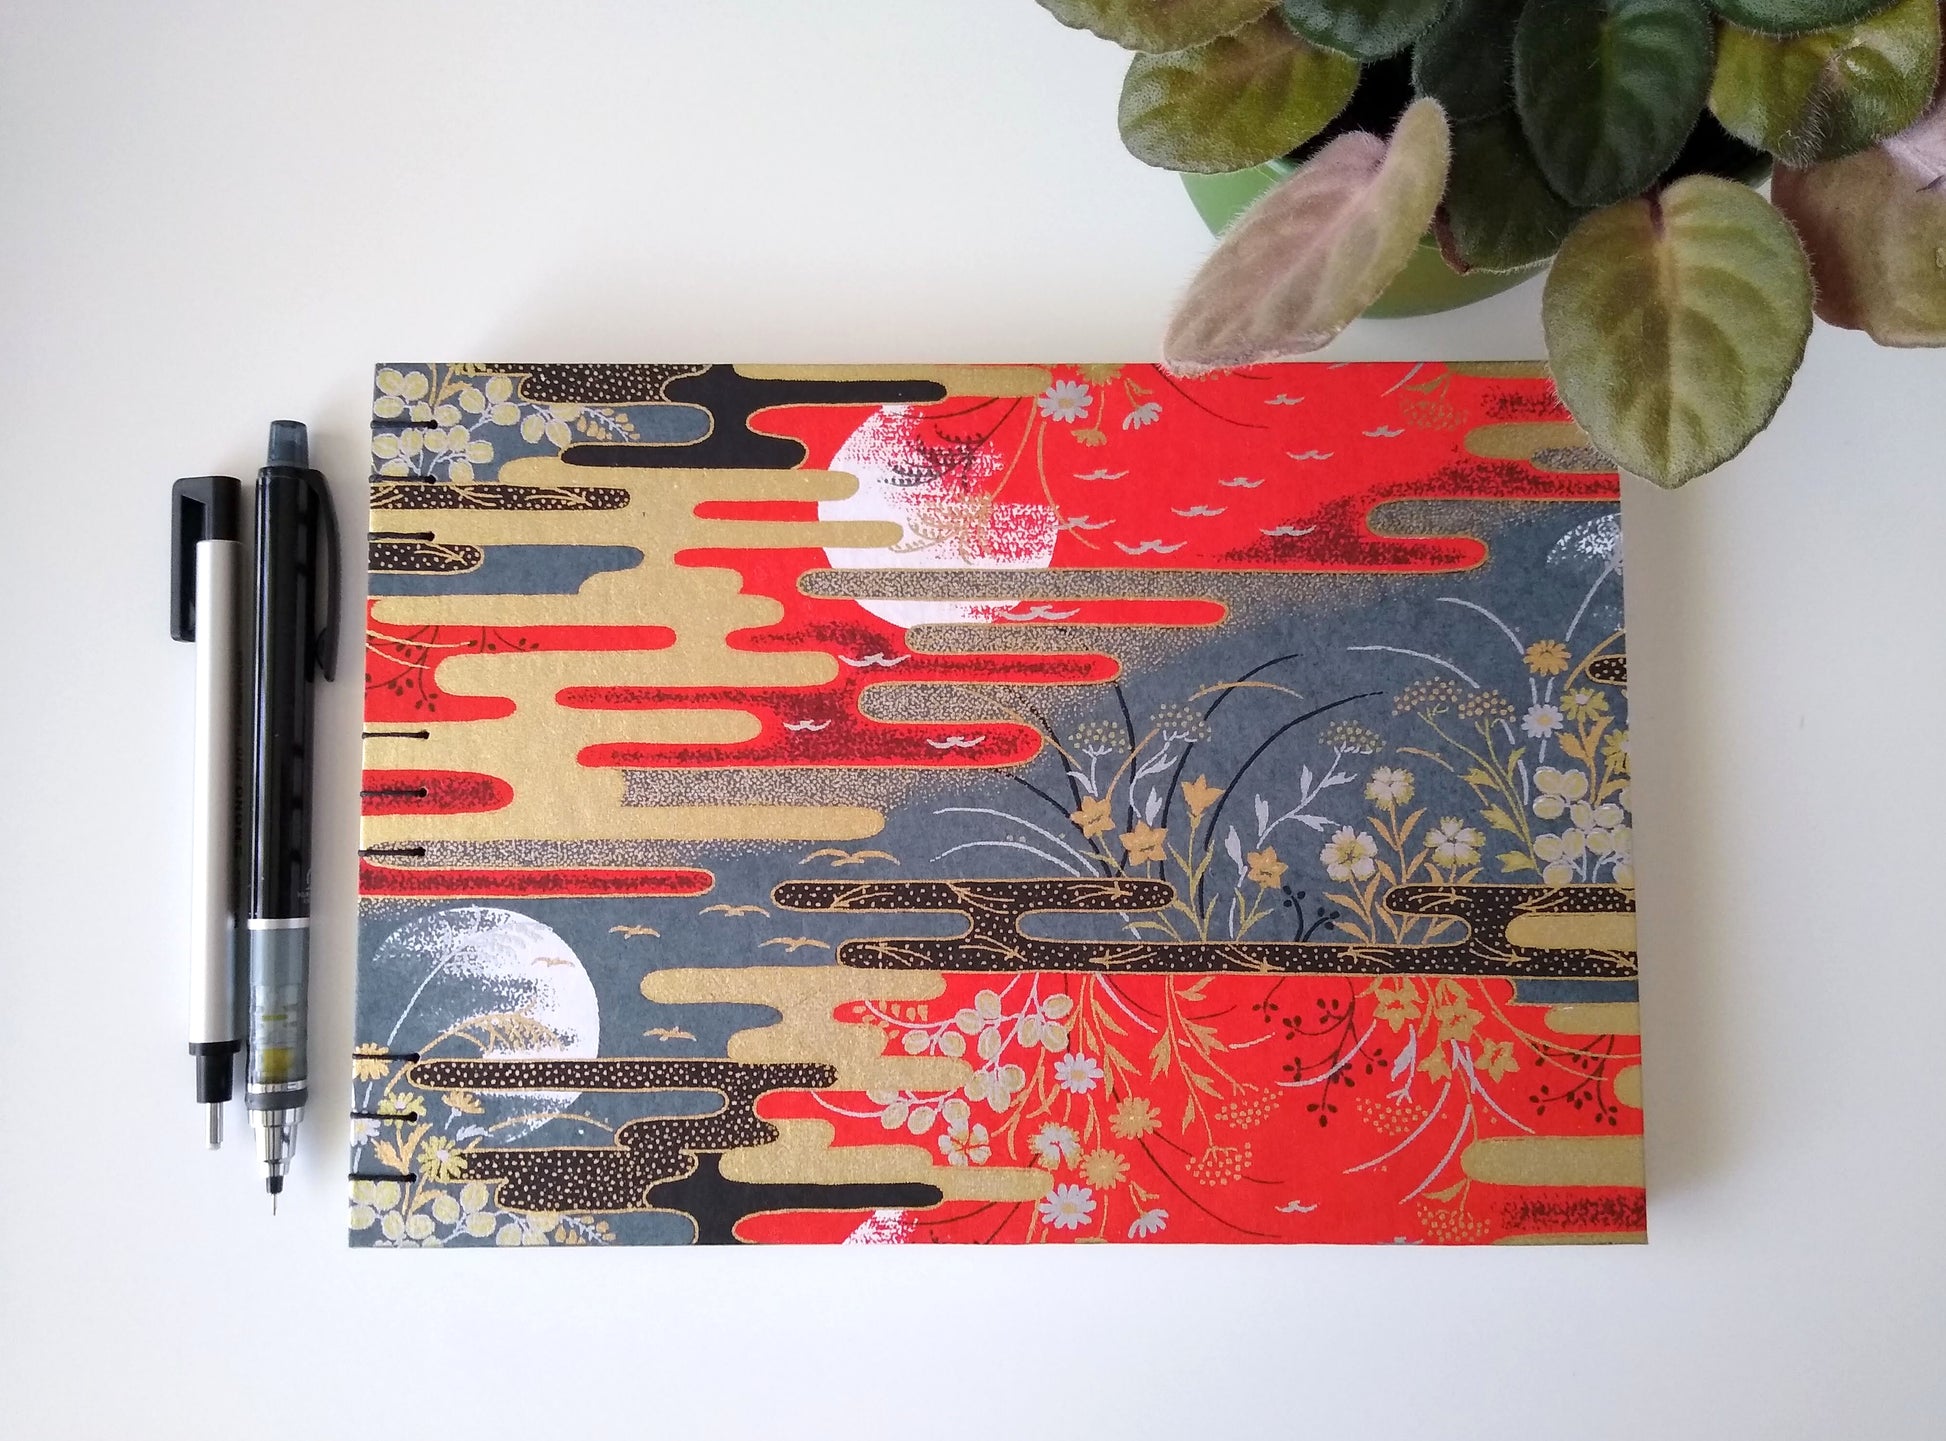 A handmade journal laying on a white desk beside a potted plant, a black mechanical pencil and a mechanical eraser. The cover of the journal is a whole scene with red and grey skies with partial moon outlines, flowers, birds, and gold and black stylized clouds.